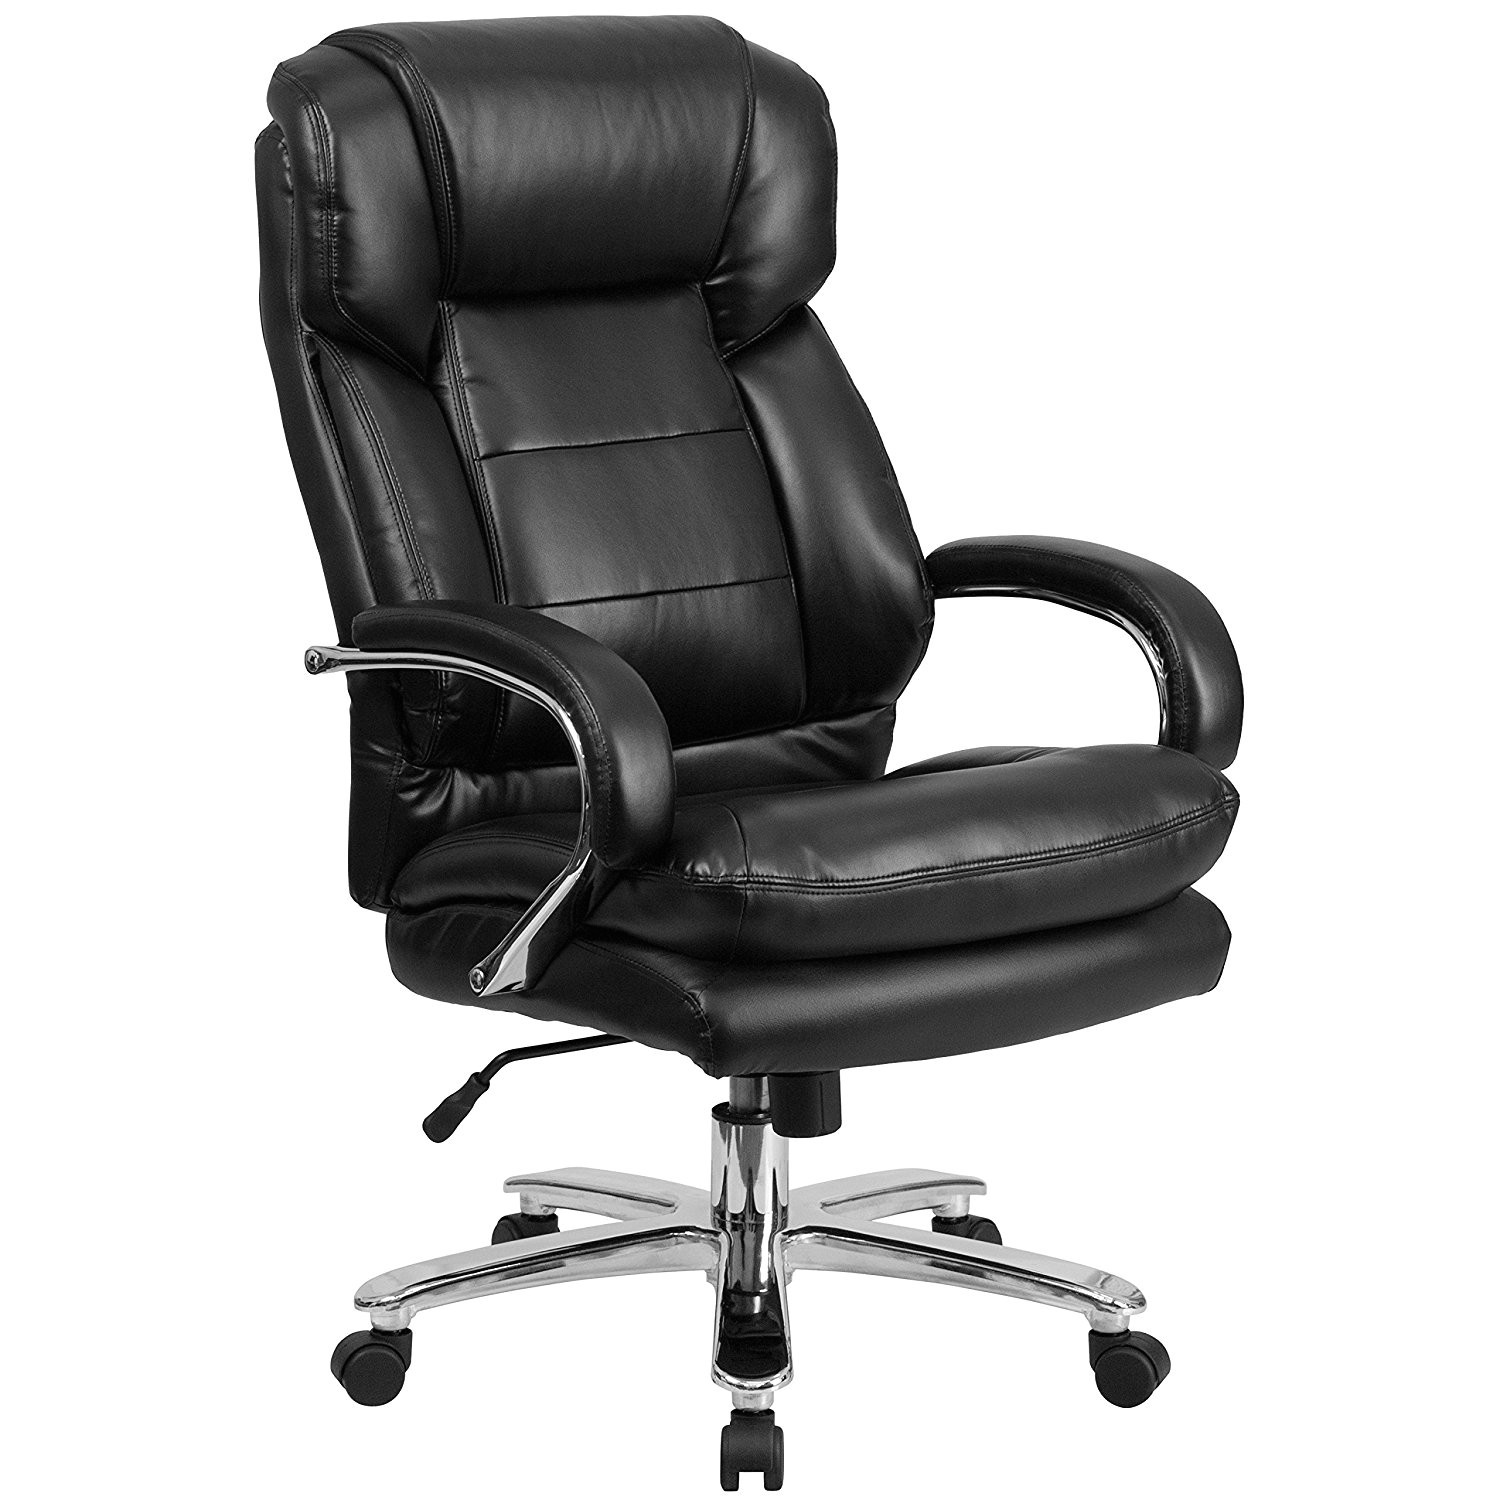 amazon com big and tall office chairs morpheus 500 lb capacity office chair kitchen dining